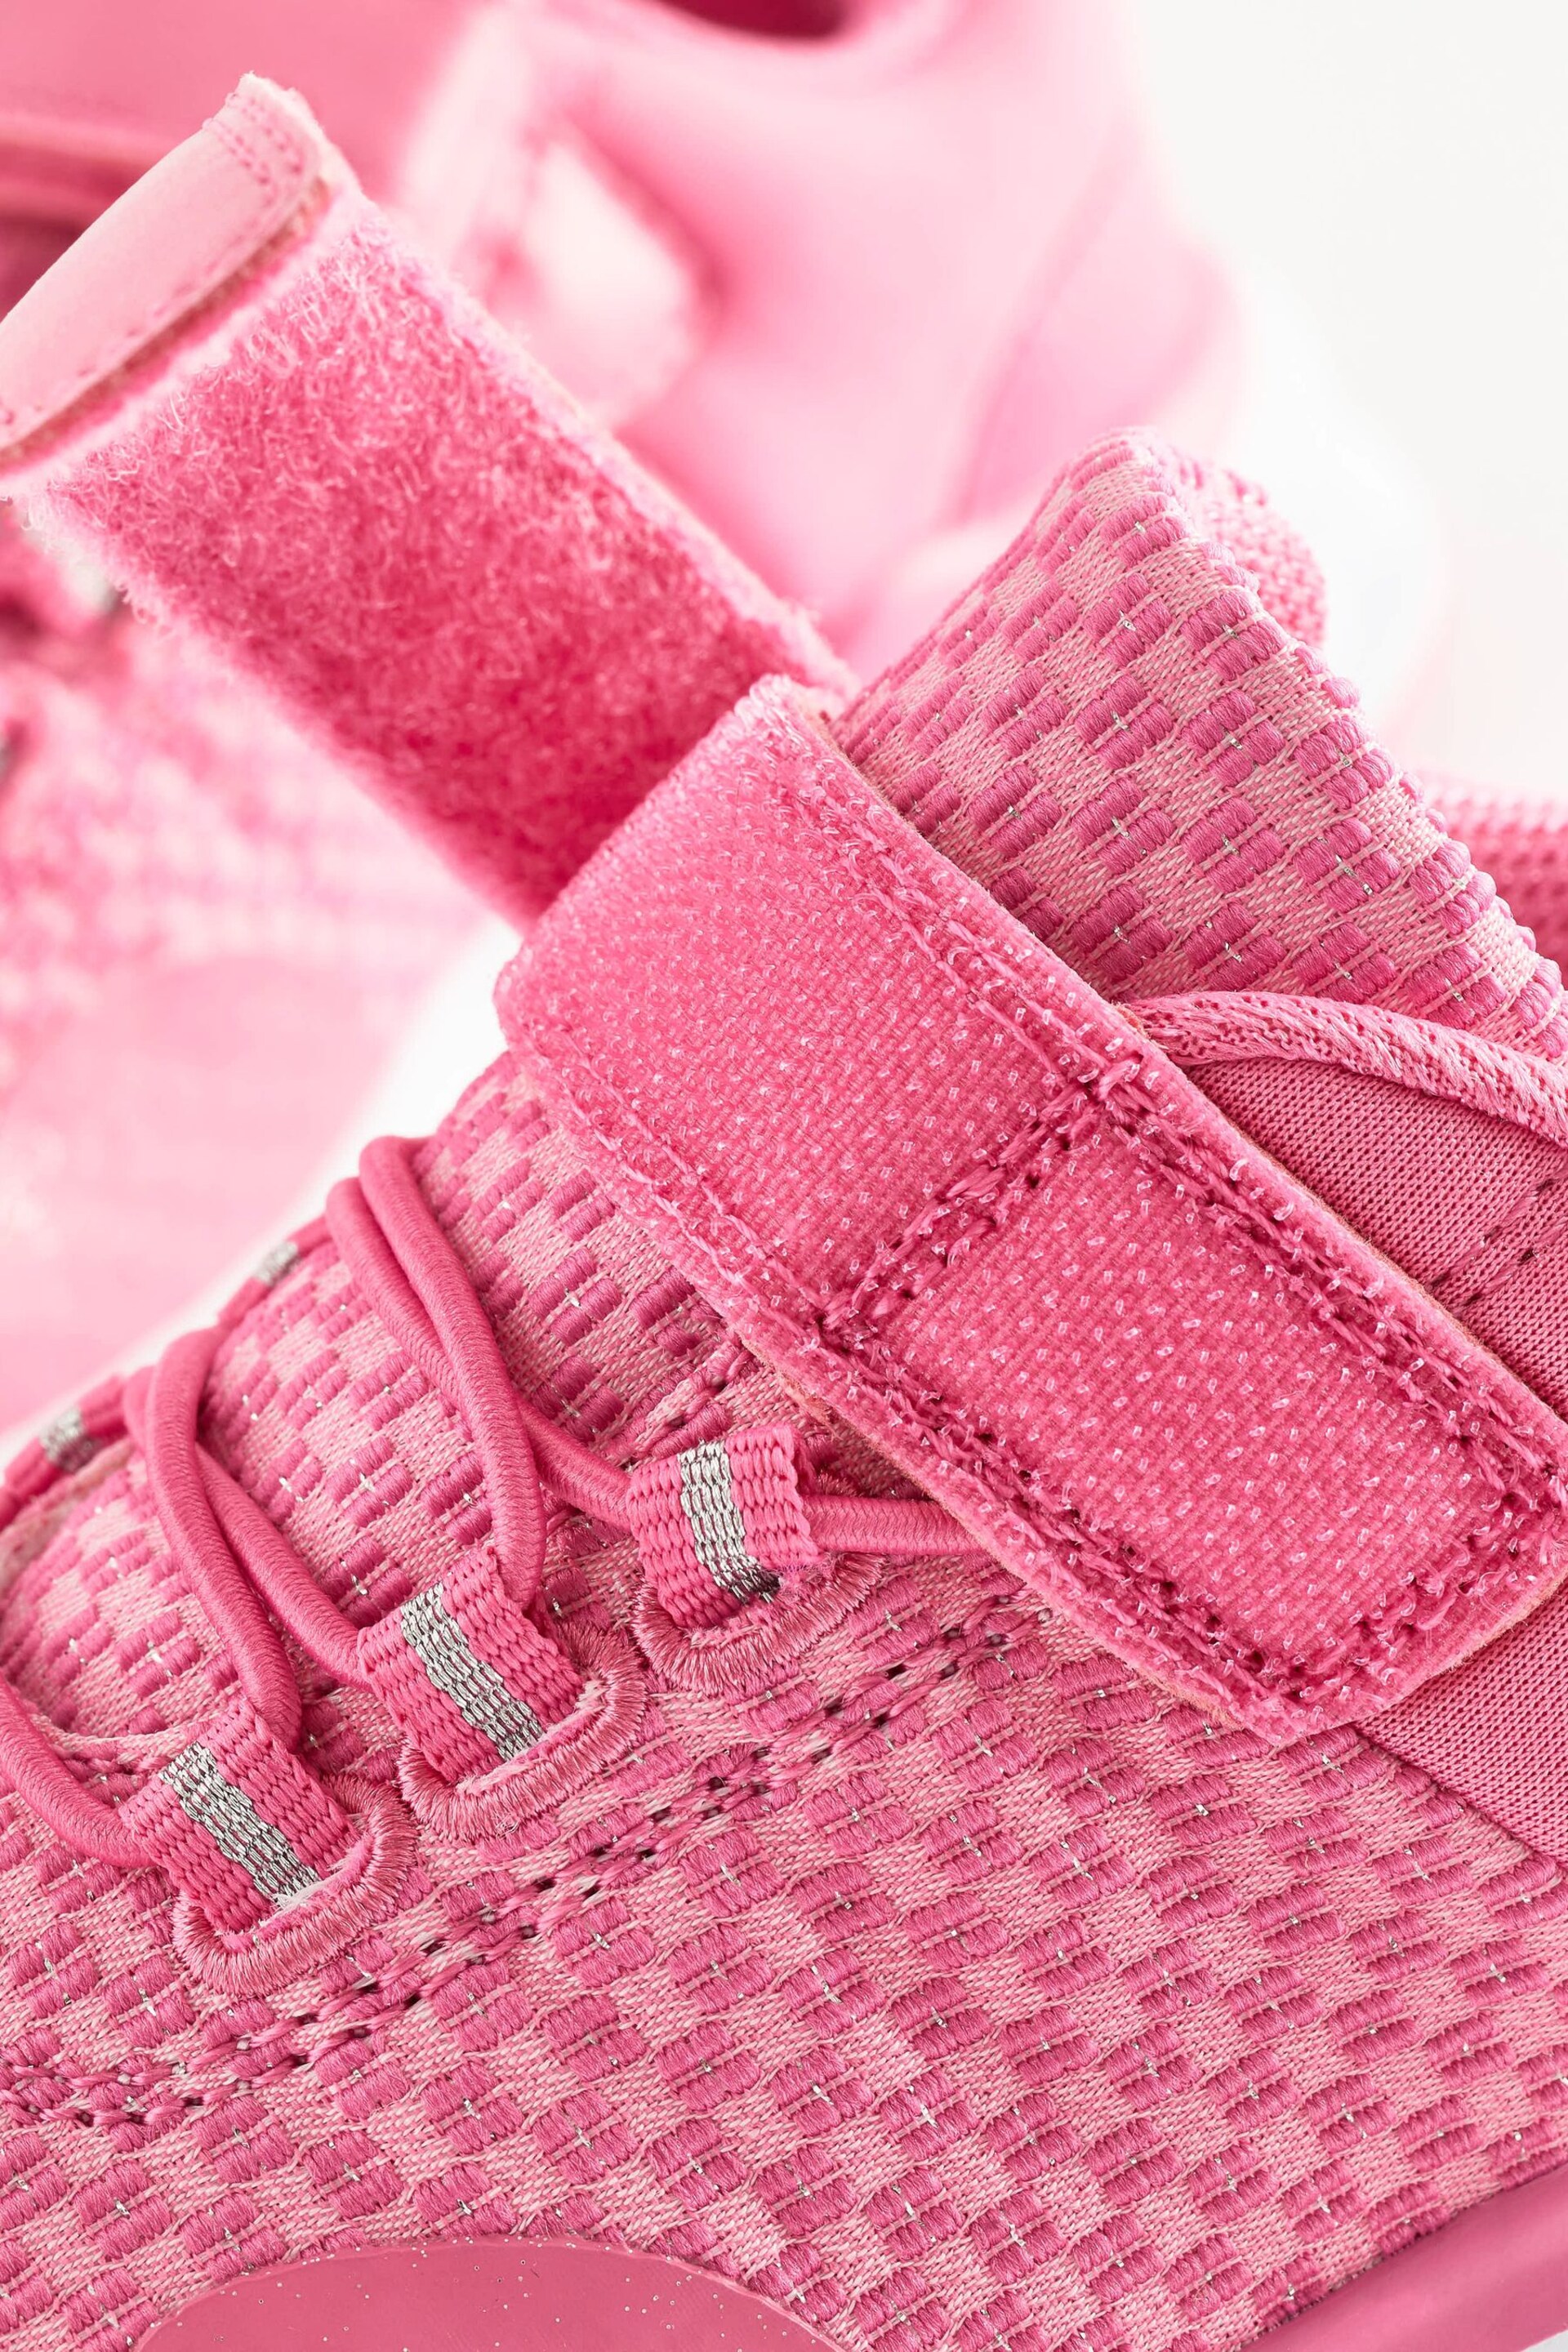 Pink Sports Trainers - Image 6 of 6